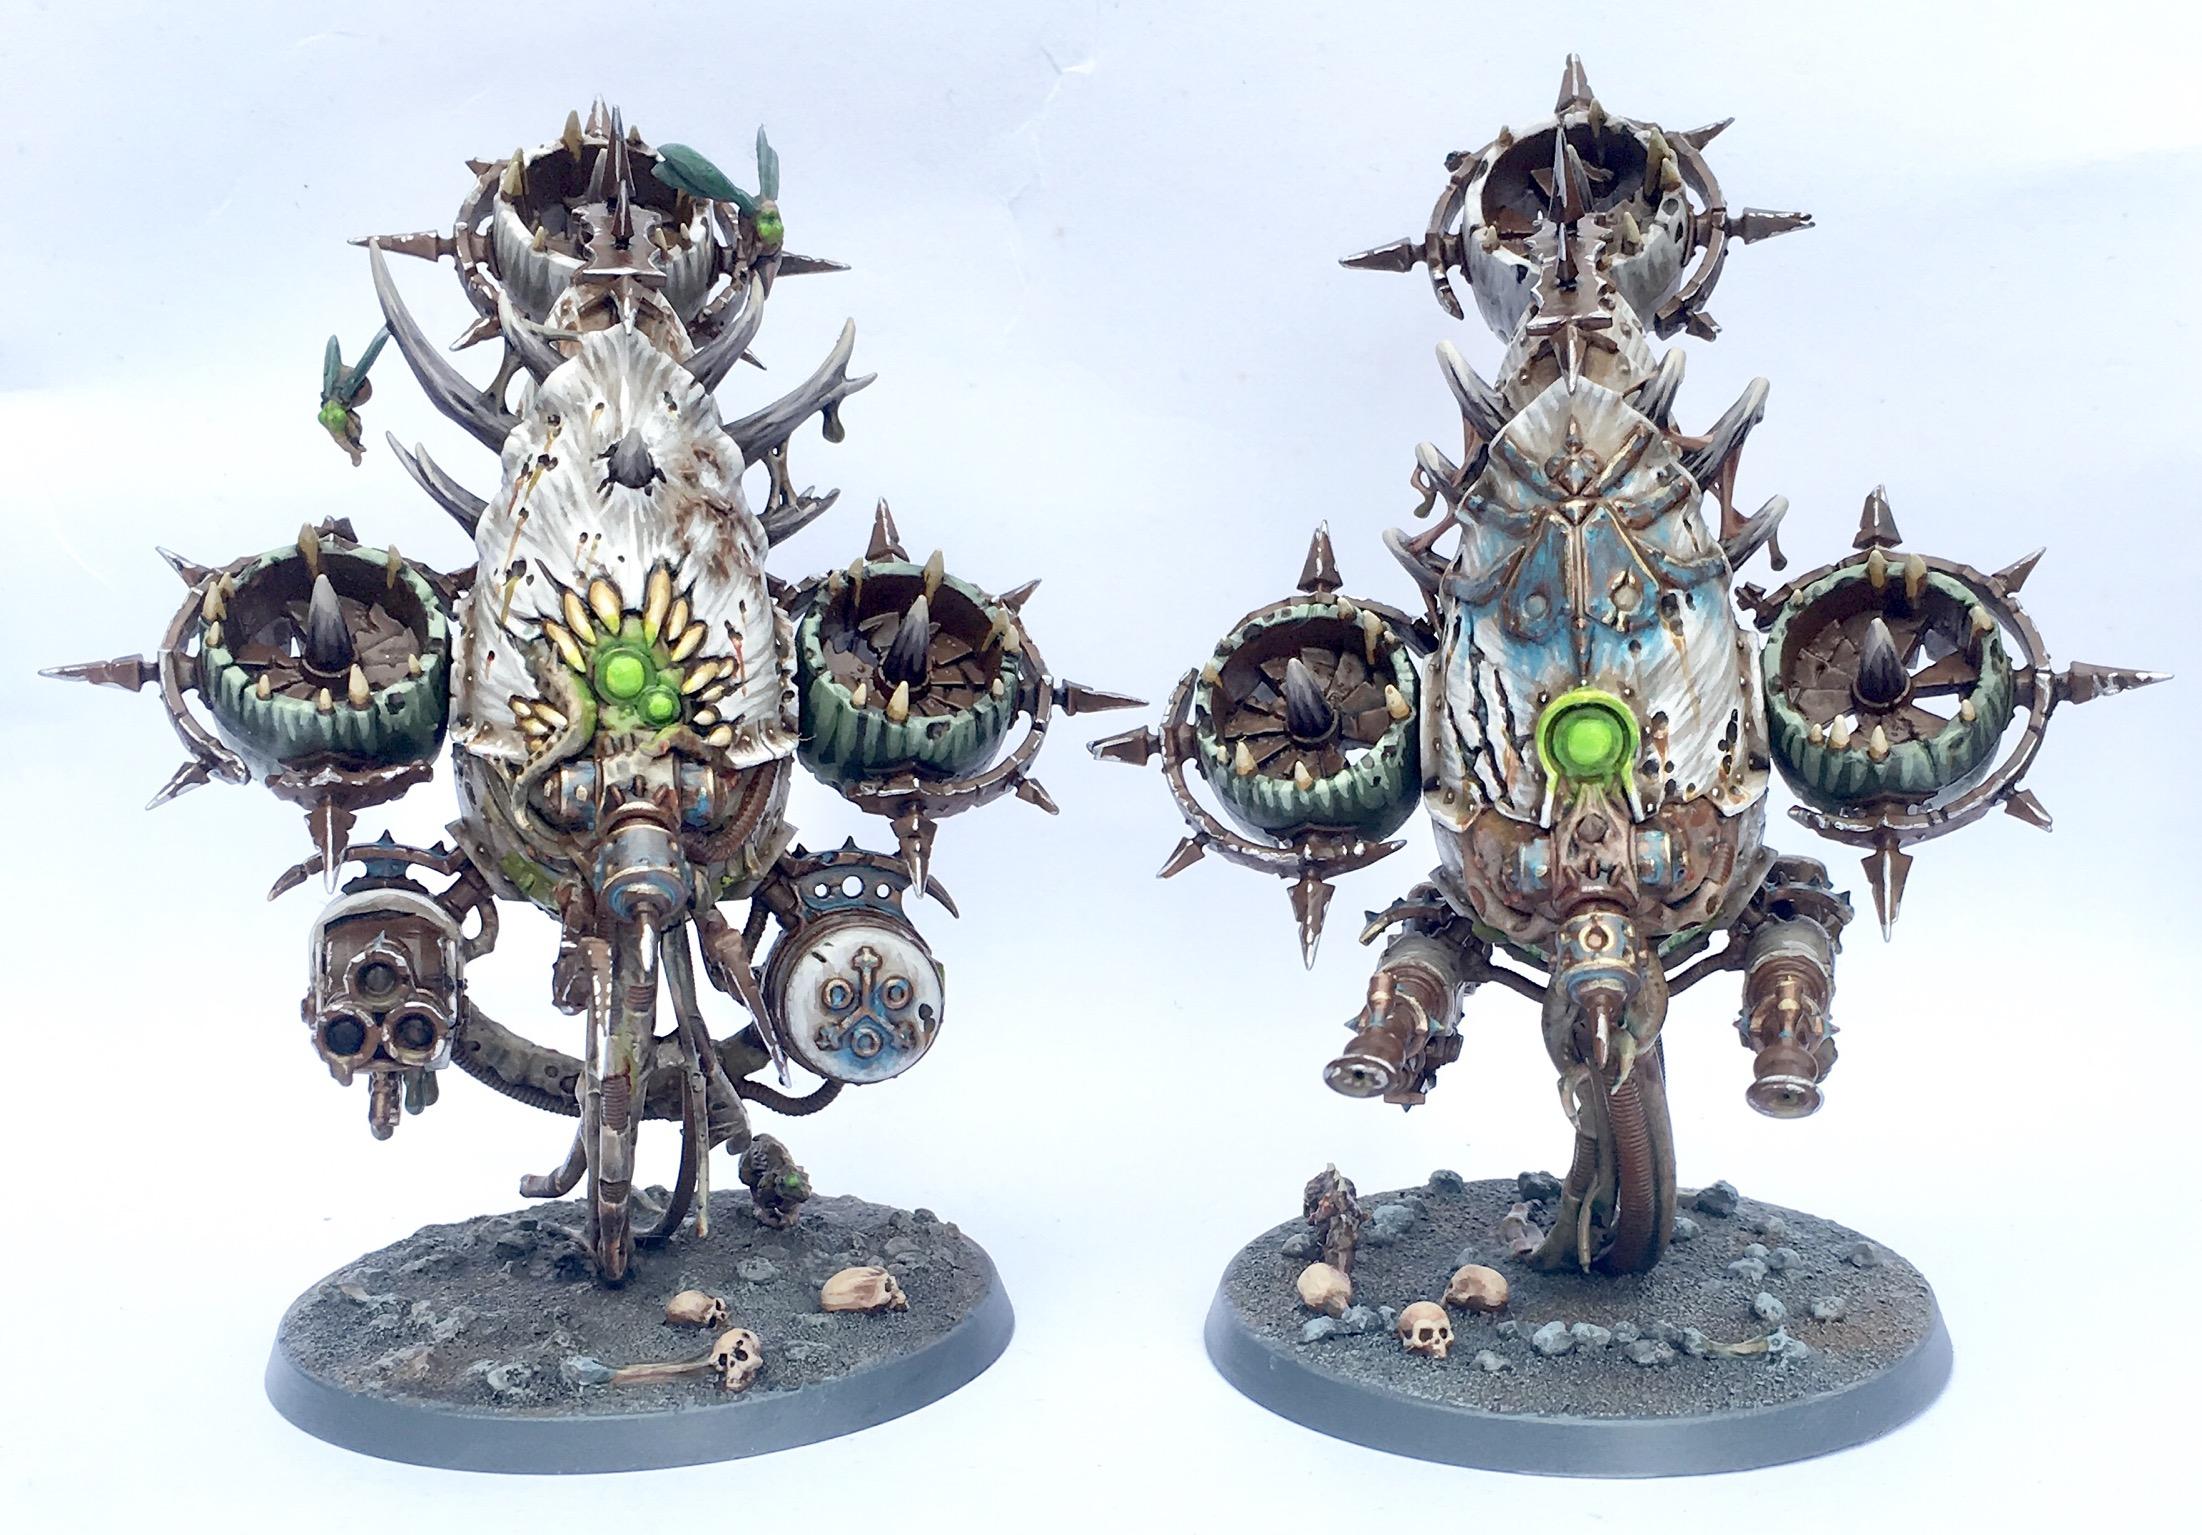 Bloat-drone, Chaos, Chaos Space Marines, Death Guard, Foetid Bloat-drone, Nurgle